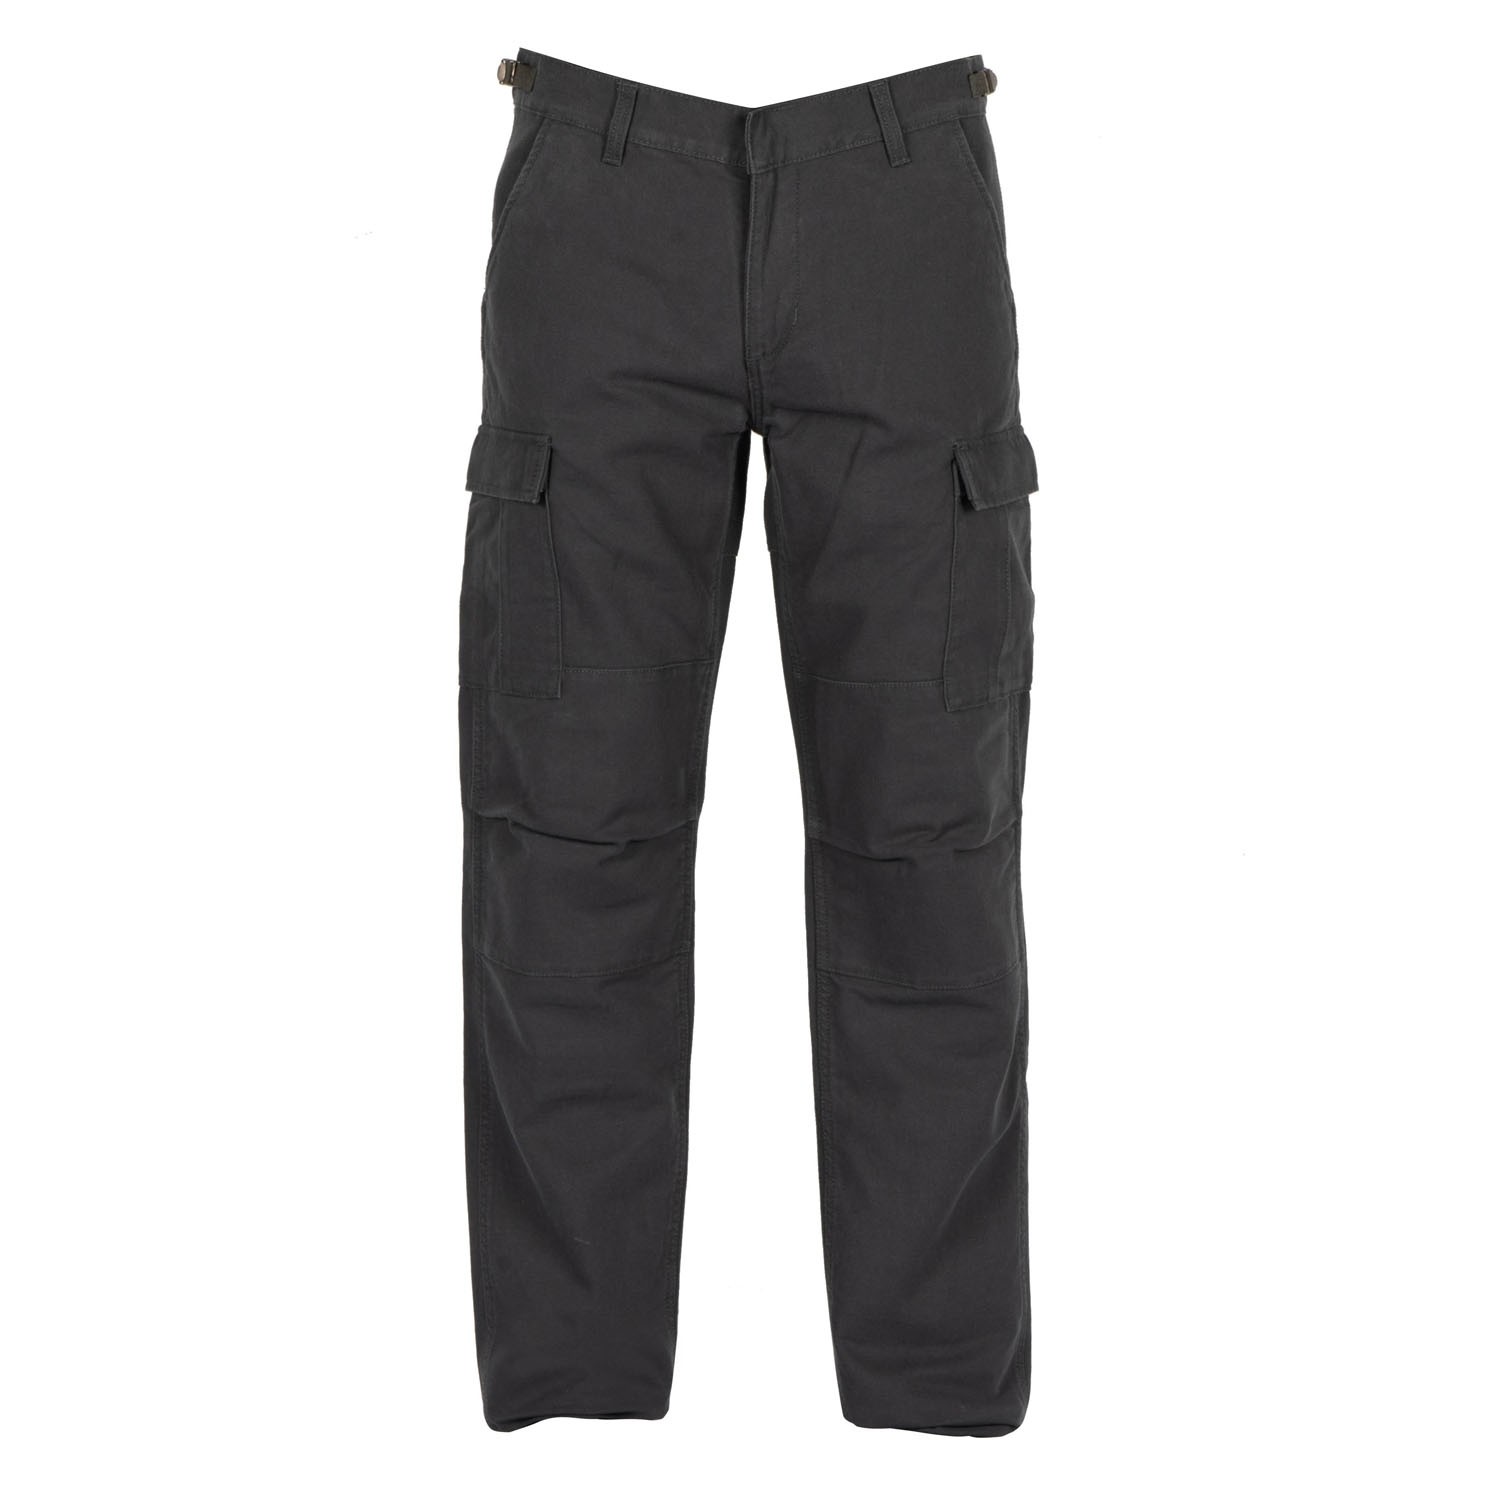 Image of Helstons Cargo Cotton Armalith Gris Pantalon Taille 38